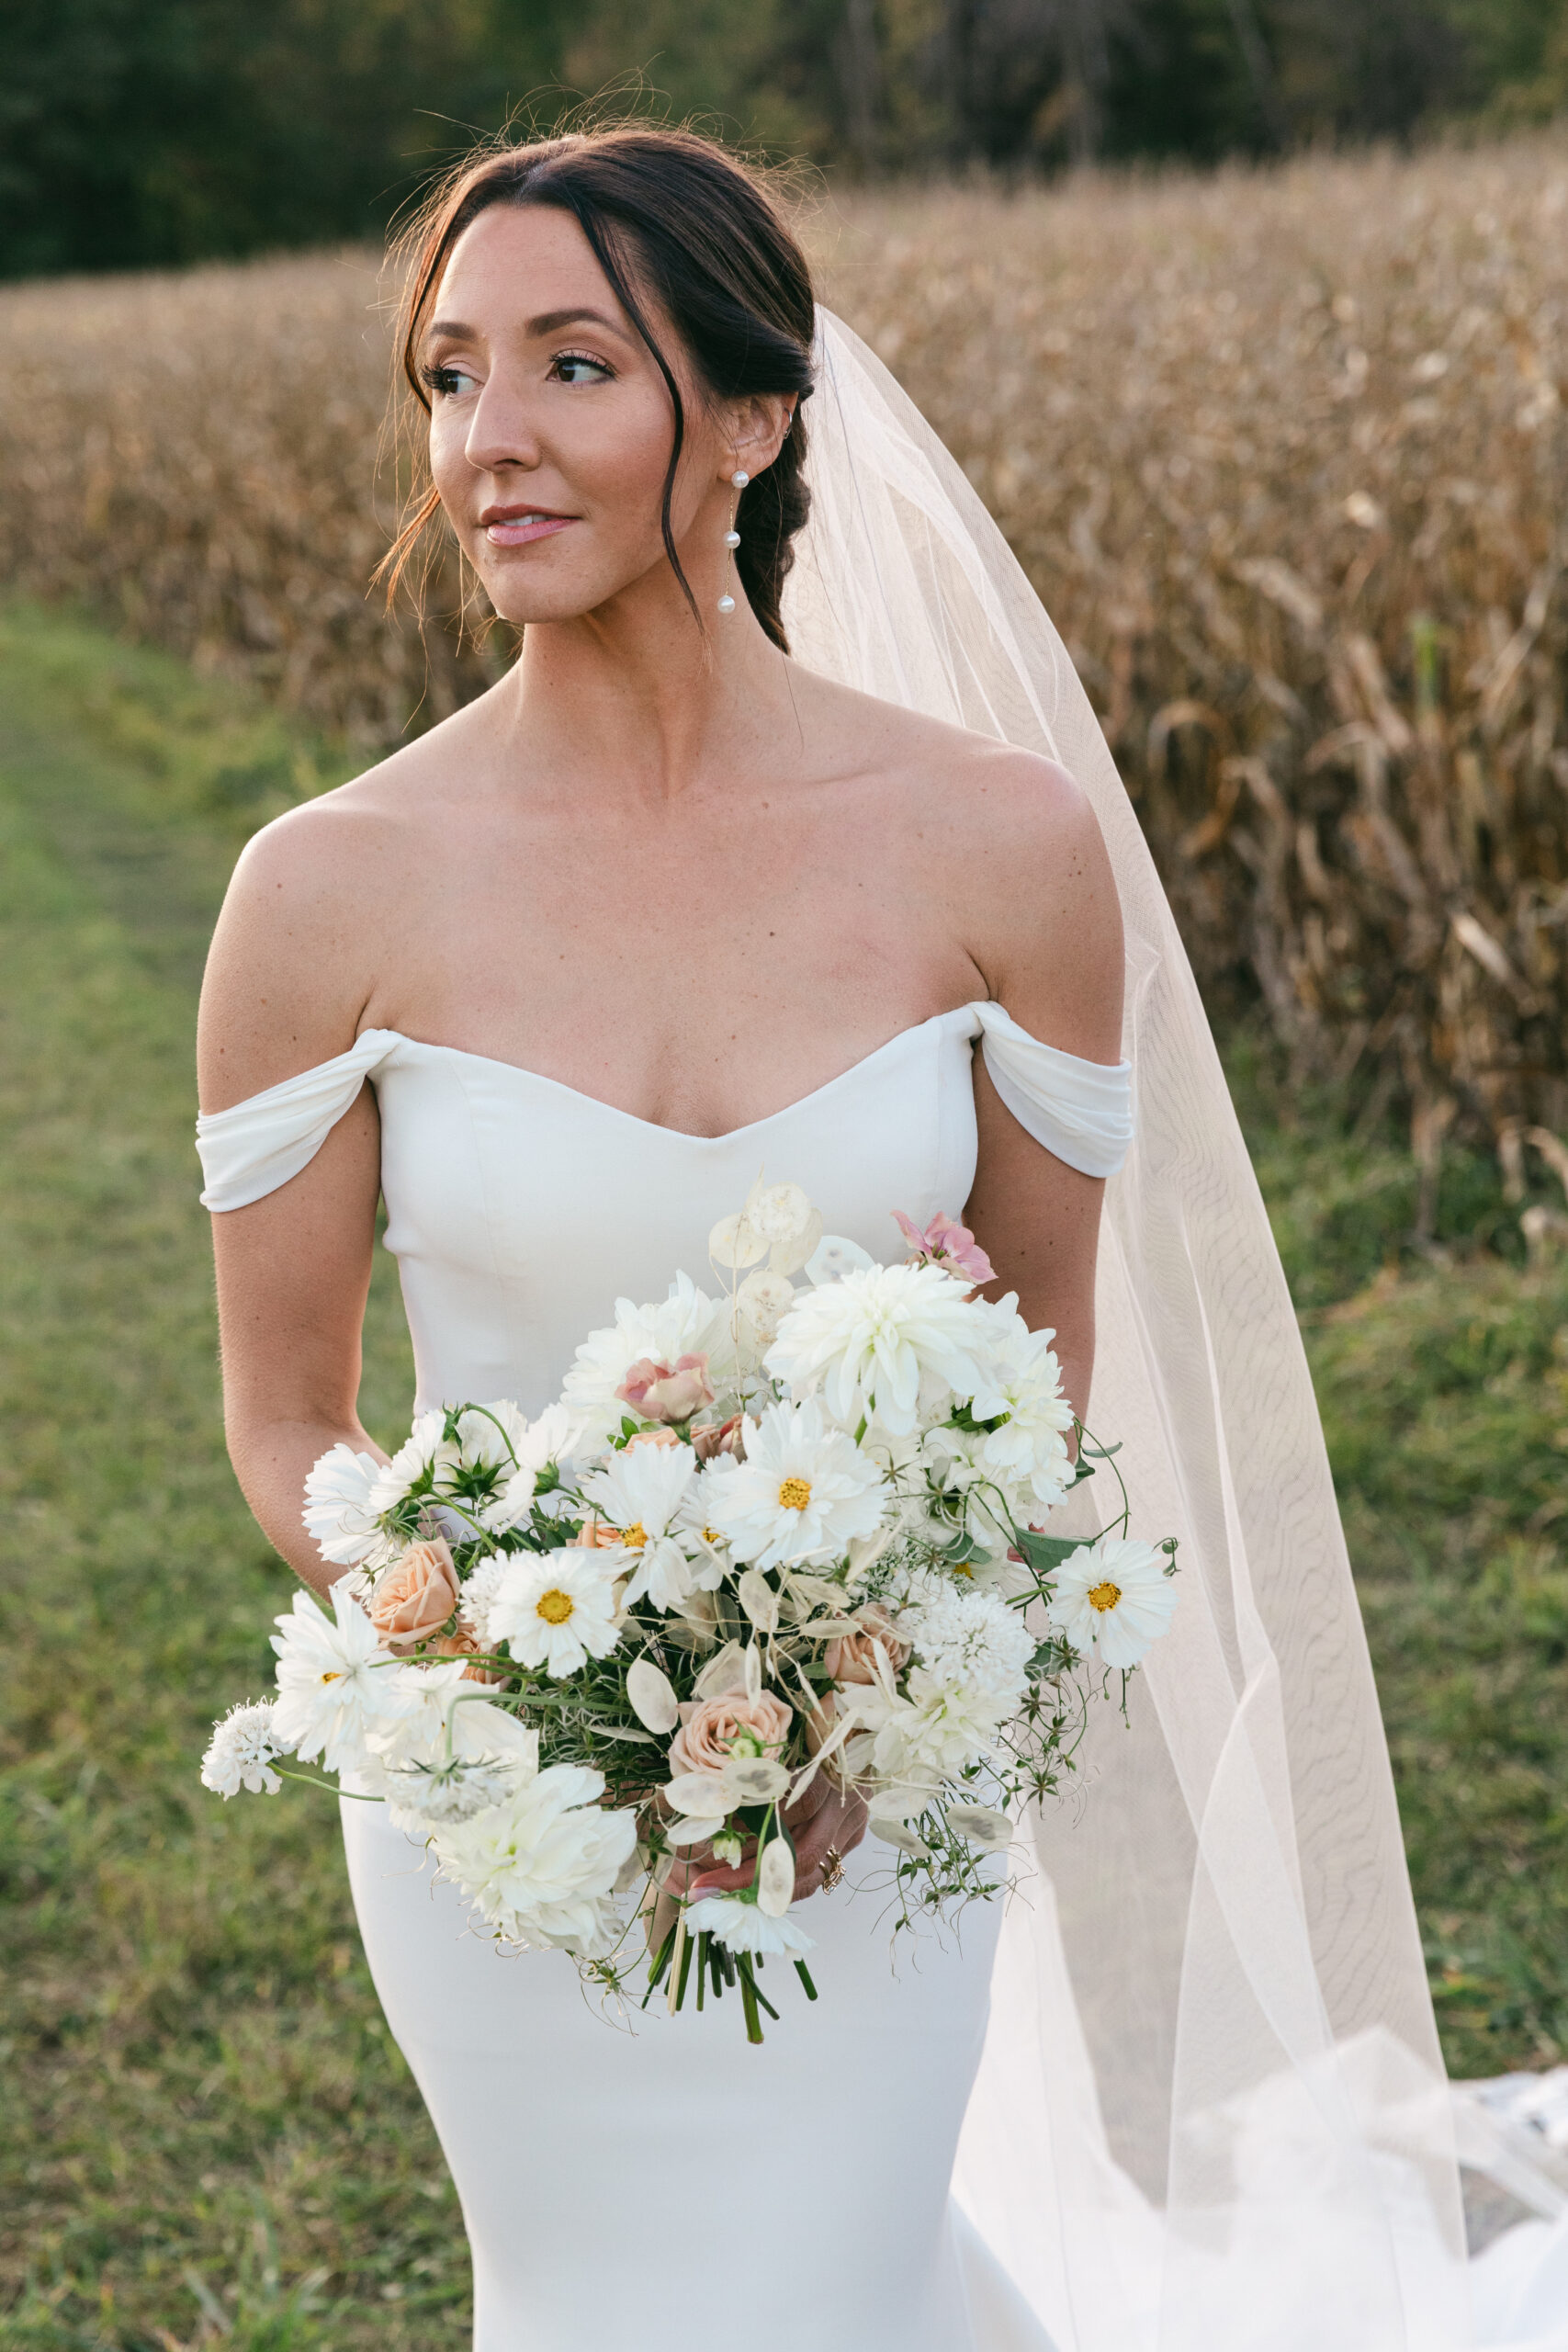 A Textural Tented Wedding at the Family Farm in Wisconsin